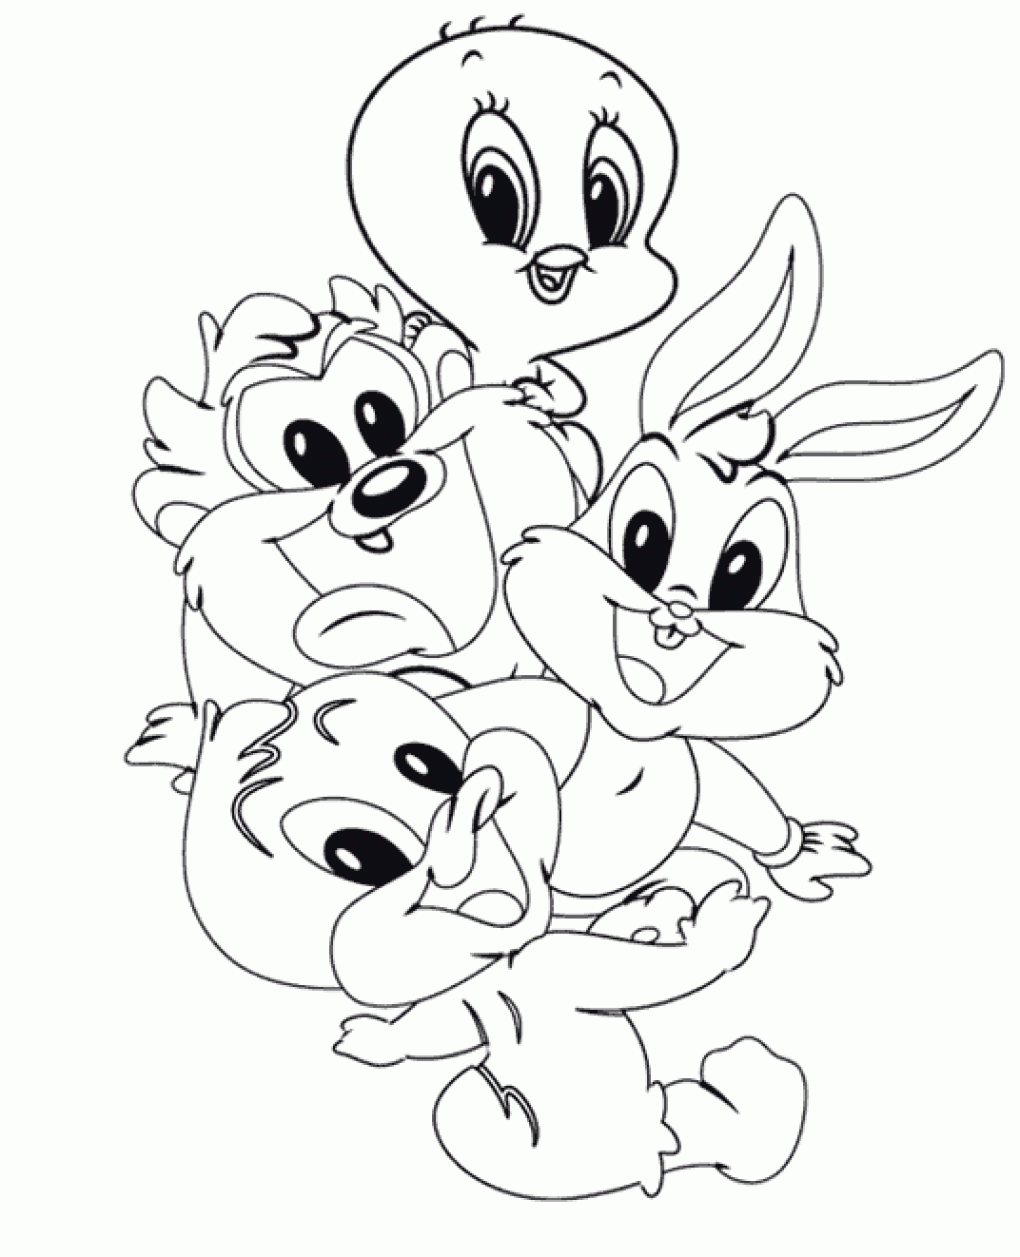 Baby Walking Coloring Pages - Coloring Pages For All Ages